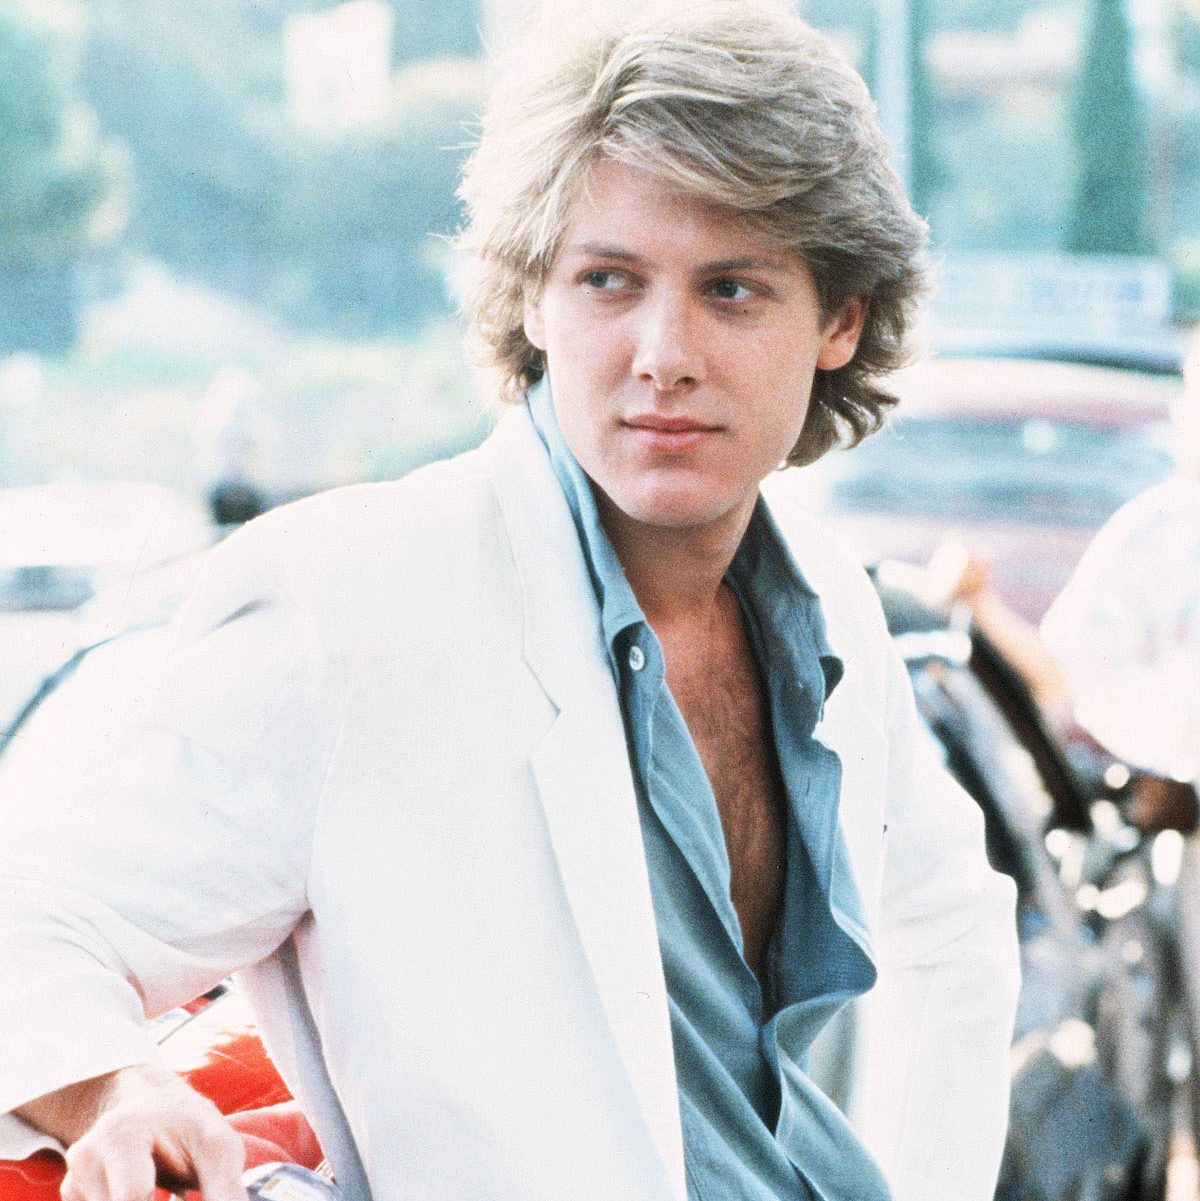 James Spader in Pretty in Pink (1986)